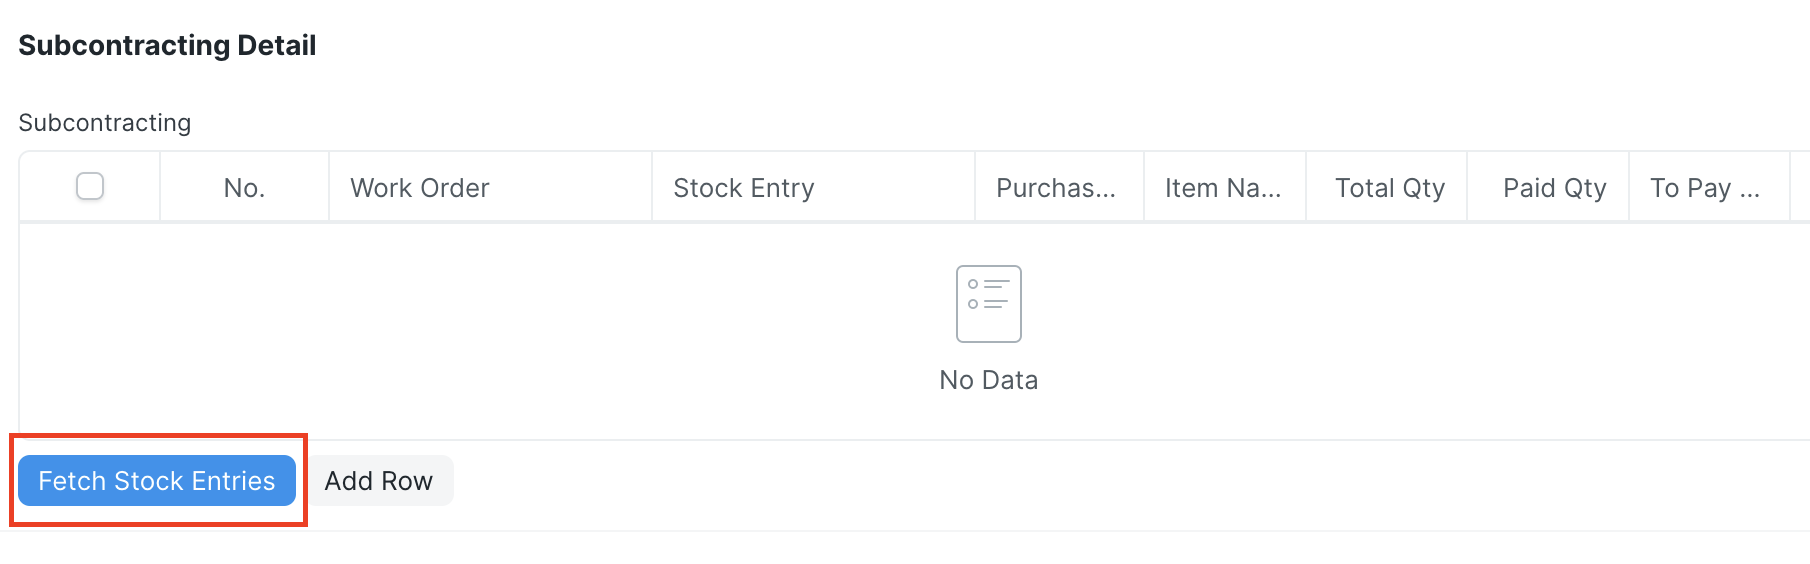 Screen shot of the new Subcontracting Detail section in a subcontracted Purchase Invoice with a Fetch Stock Entries button